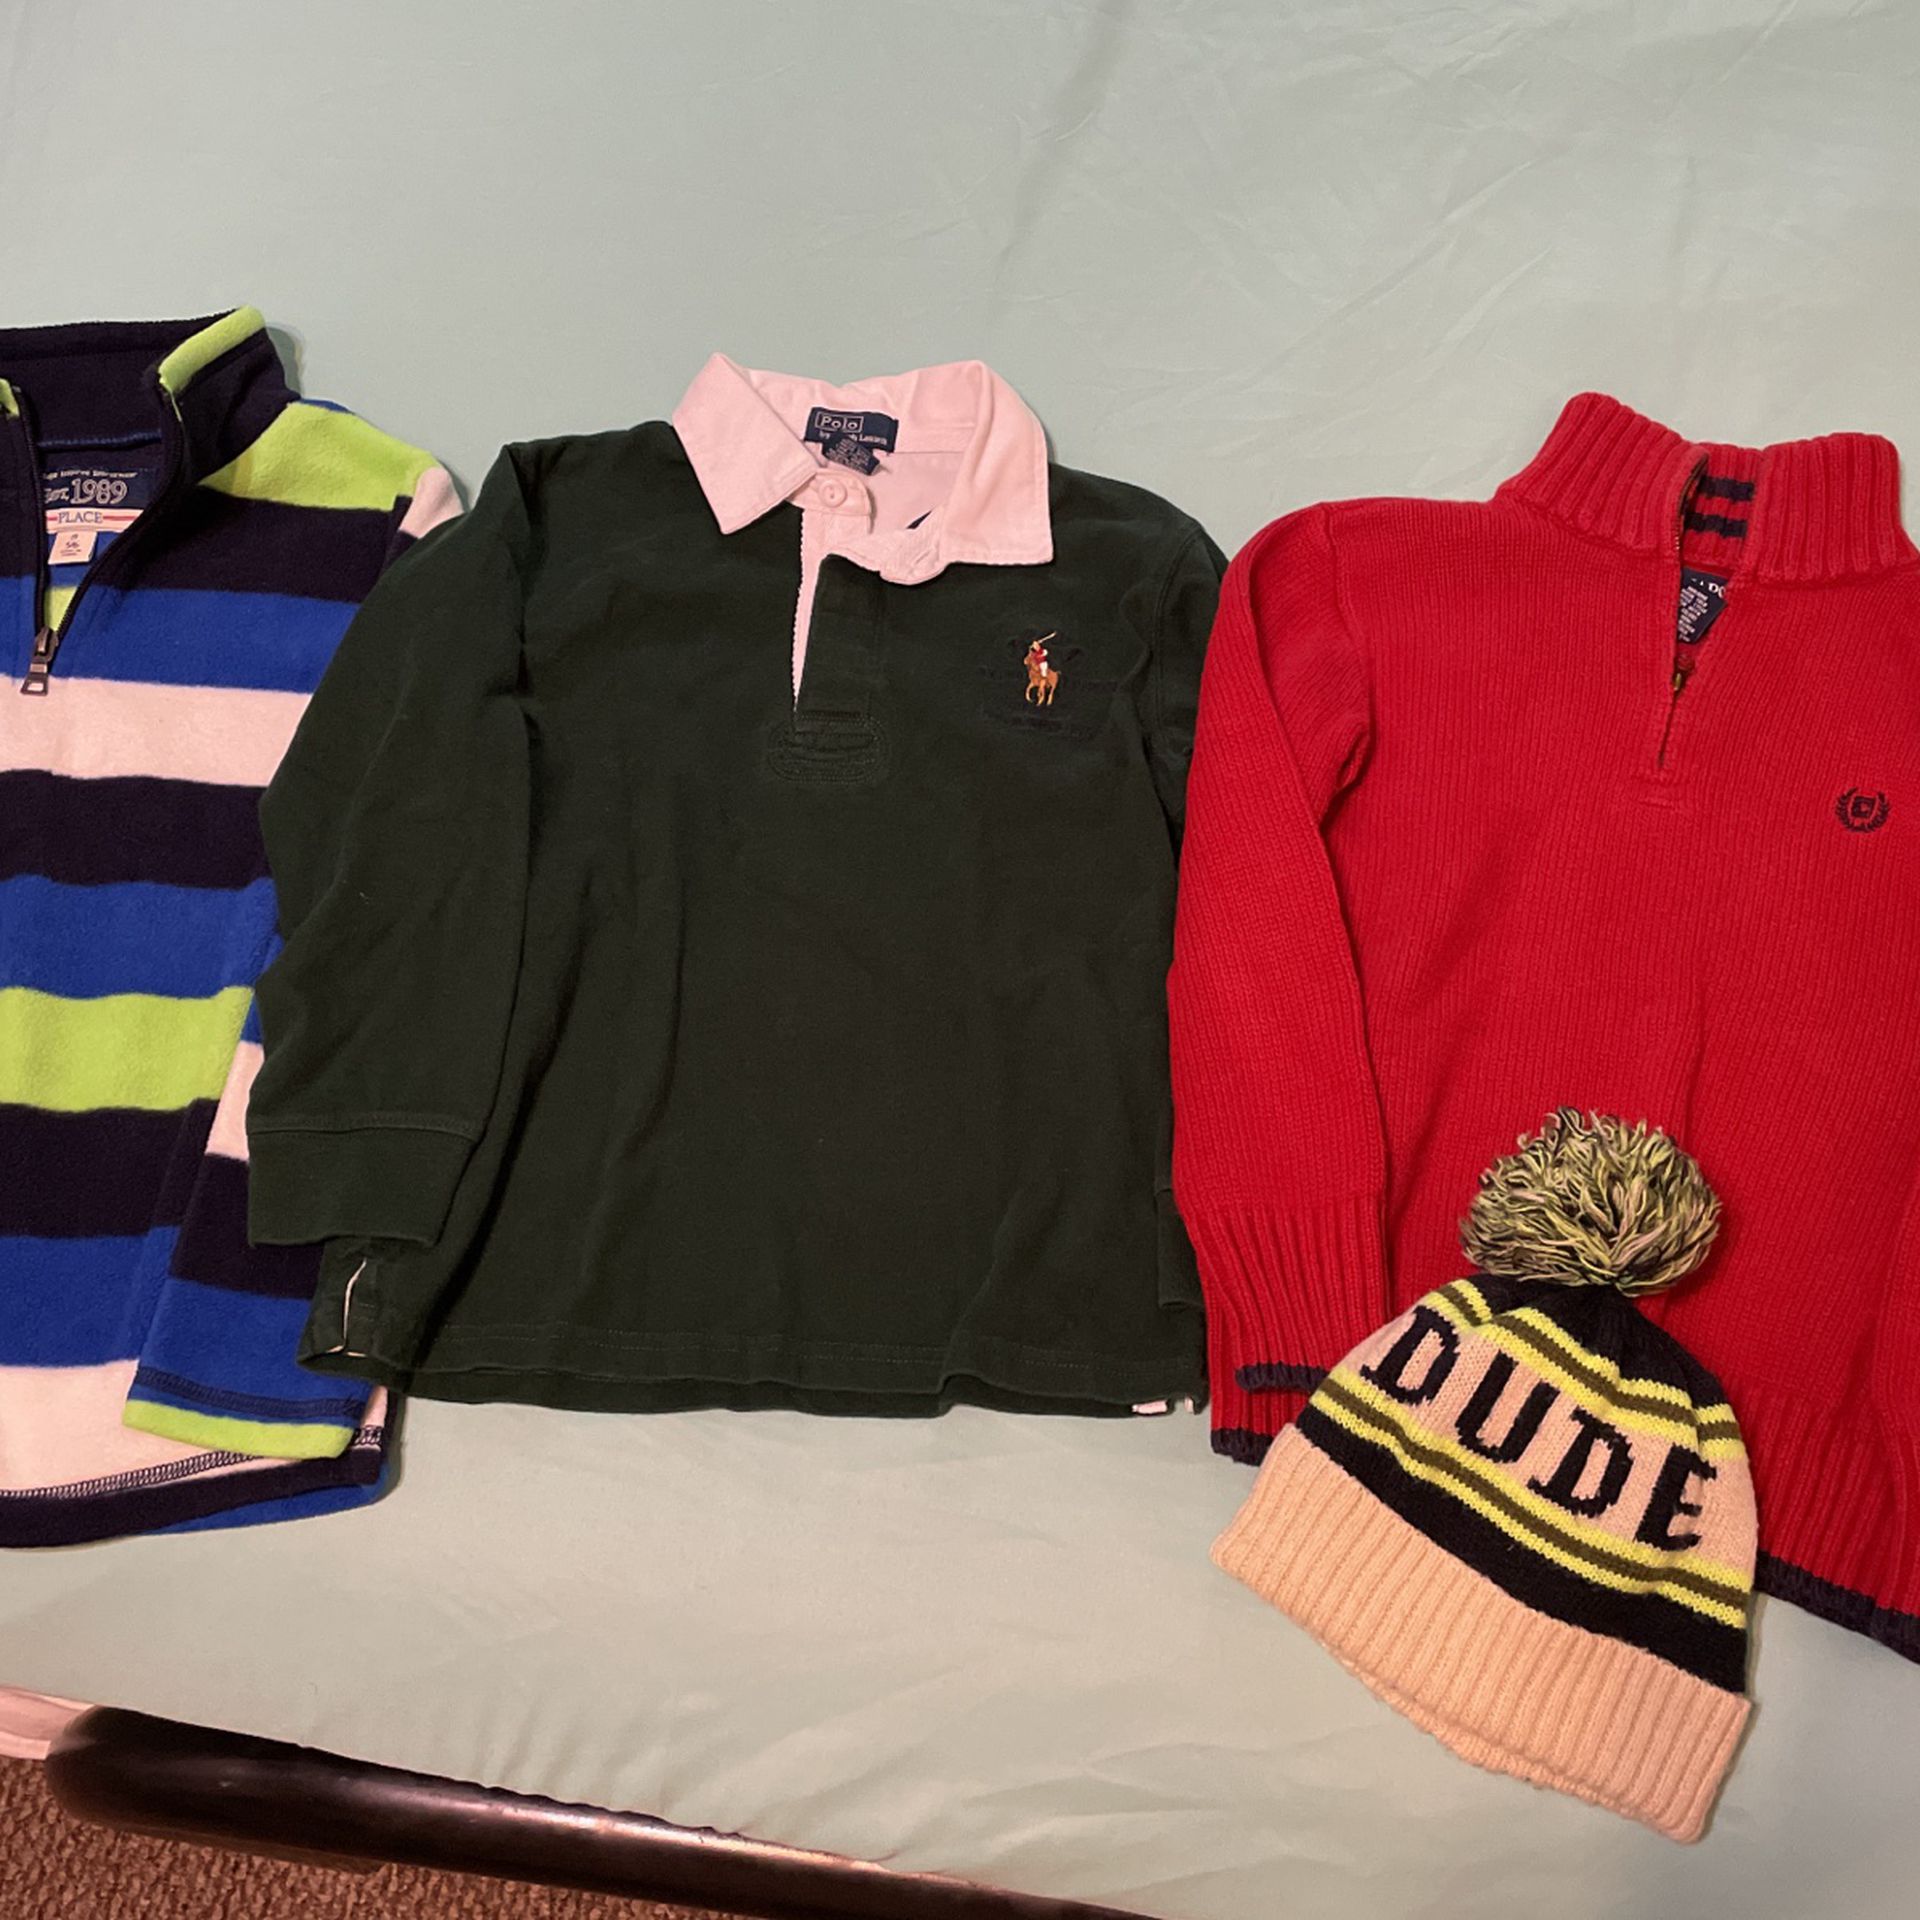 Boys Size 5/6 Small Polo By Ralph Lauren Chaps Children’s Place Winter Shirts And Toboggan Cap